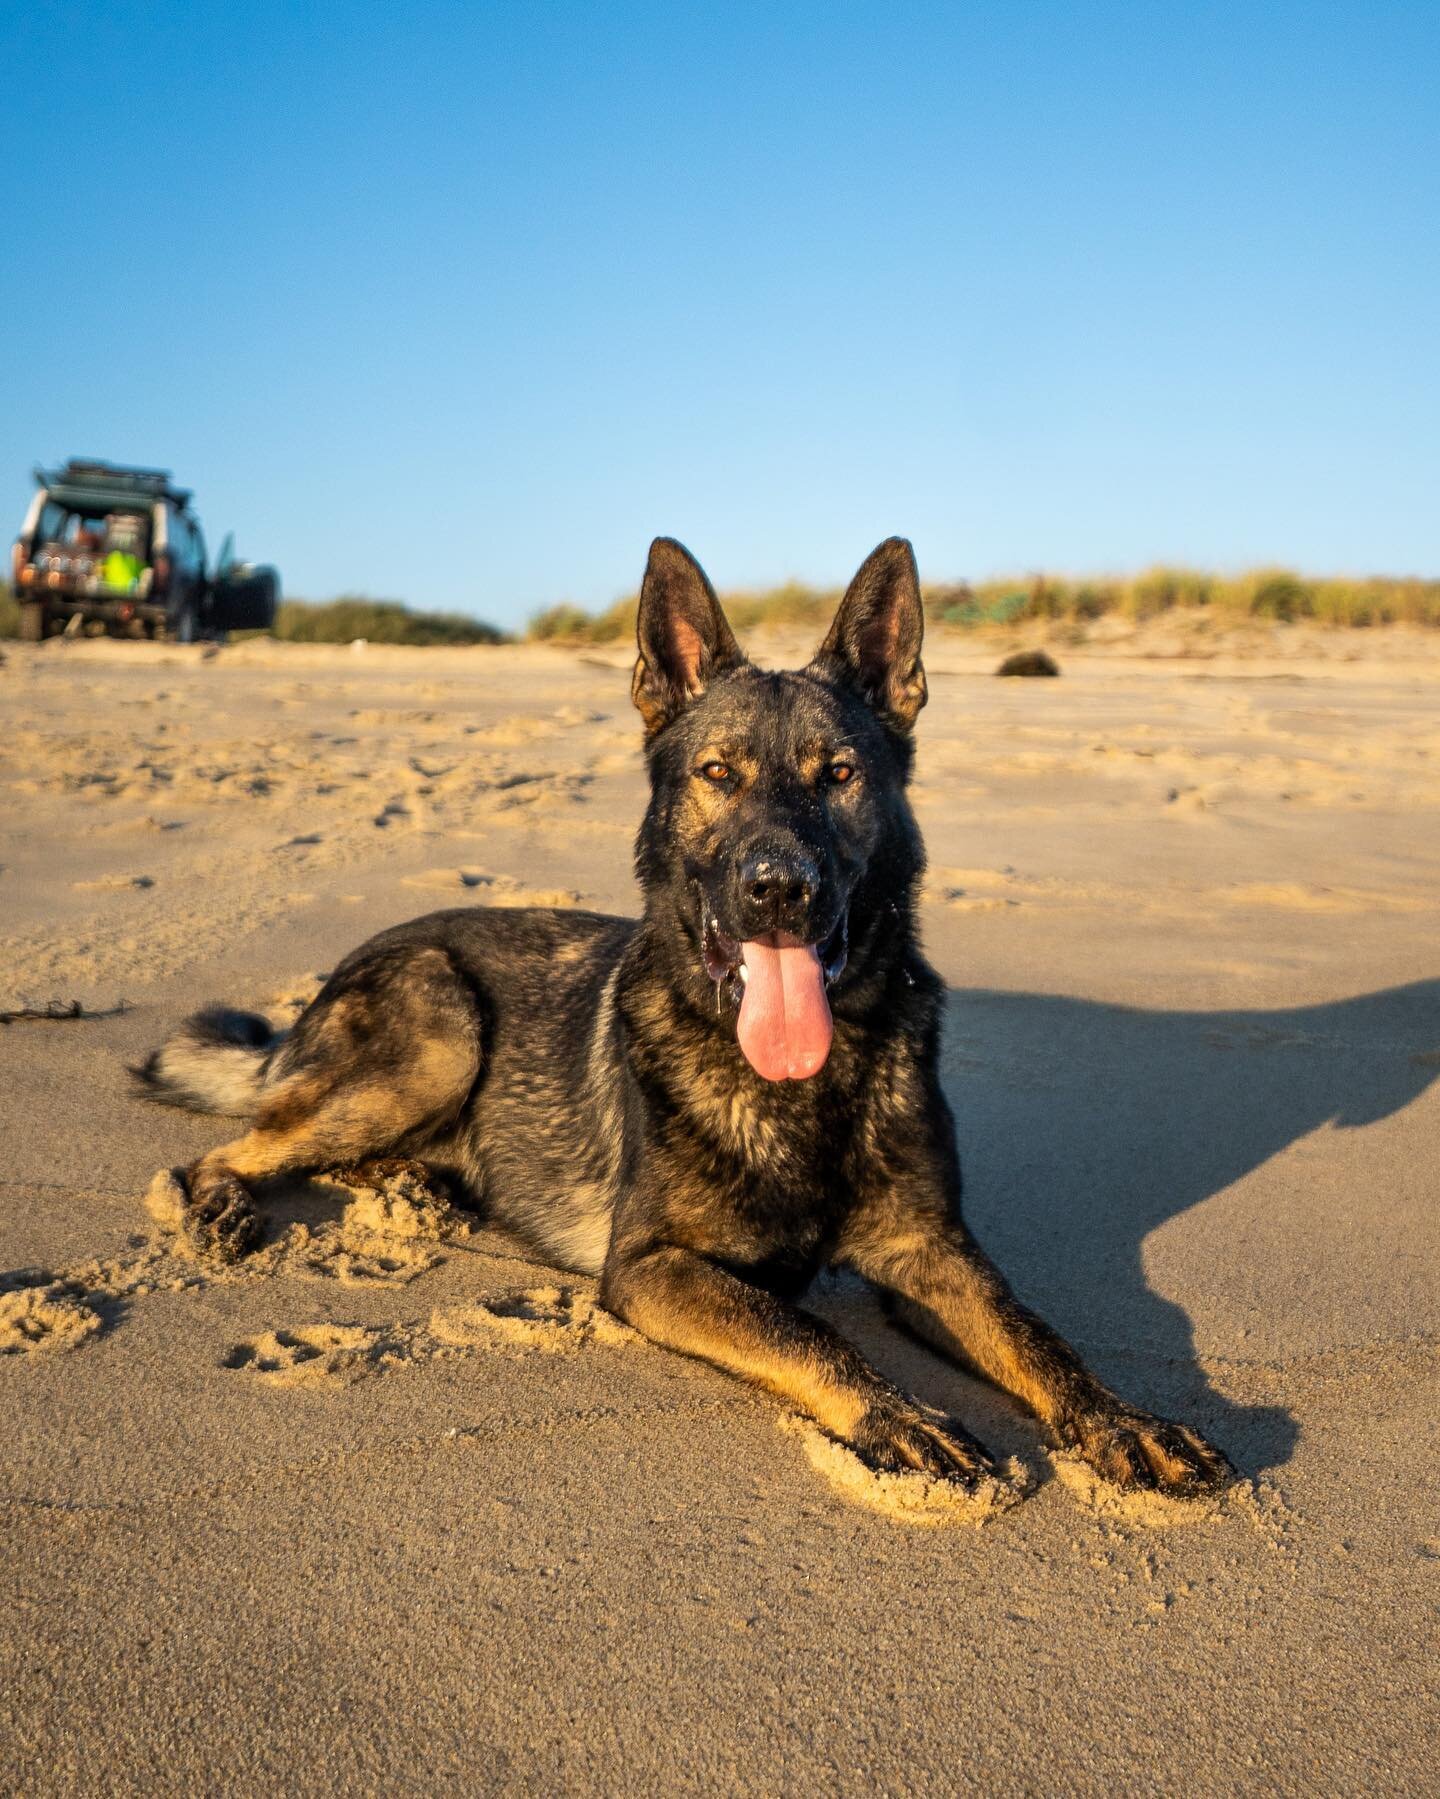 X-RAYS, FEARS OF HIP DYSPLASIA AND THE RESULTS&hellip;

One of my biggest fears when I got Vilk was that we wouldn&rsquo;t be able to be active and outdoorsy together.

I have always wanted a dog I could be partners with. A dog I could run long dista